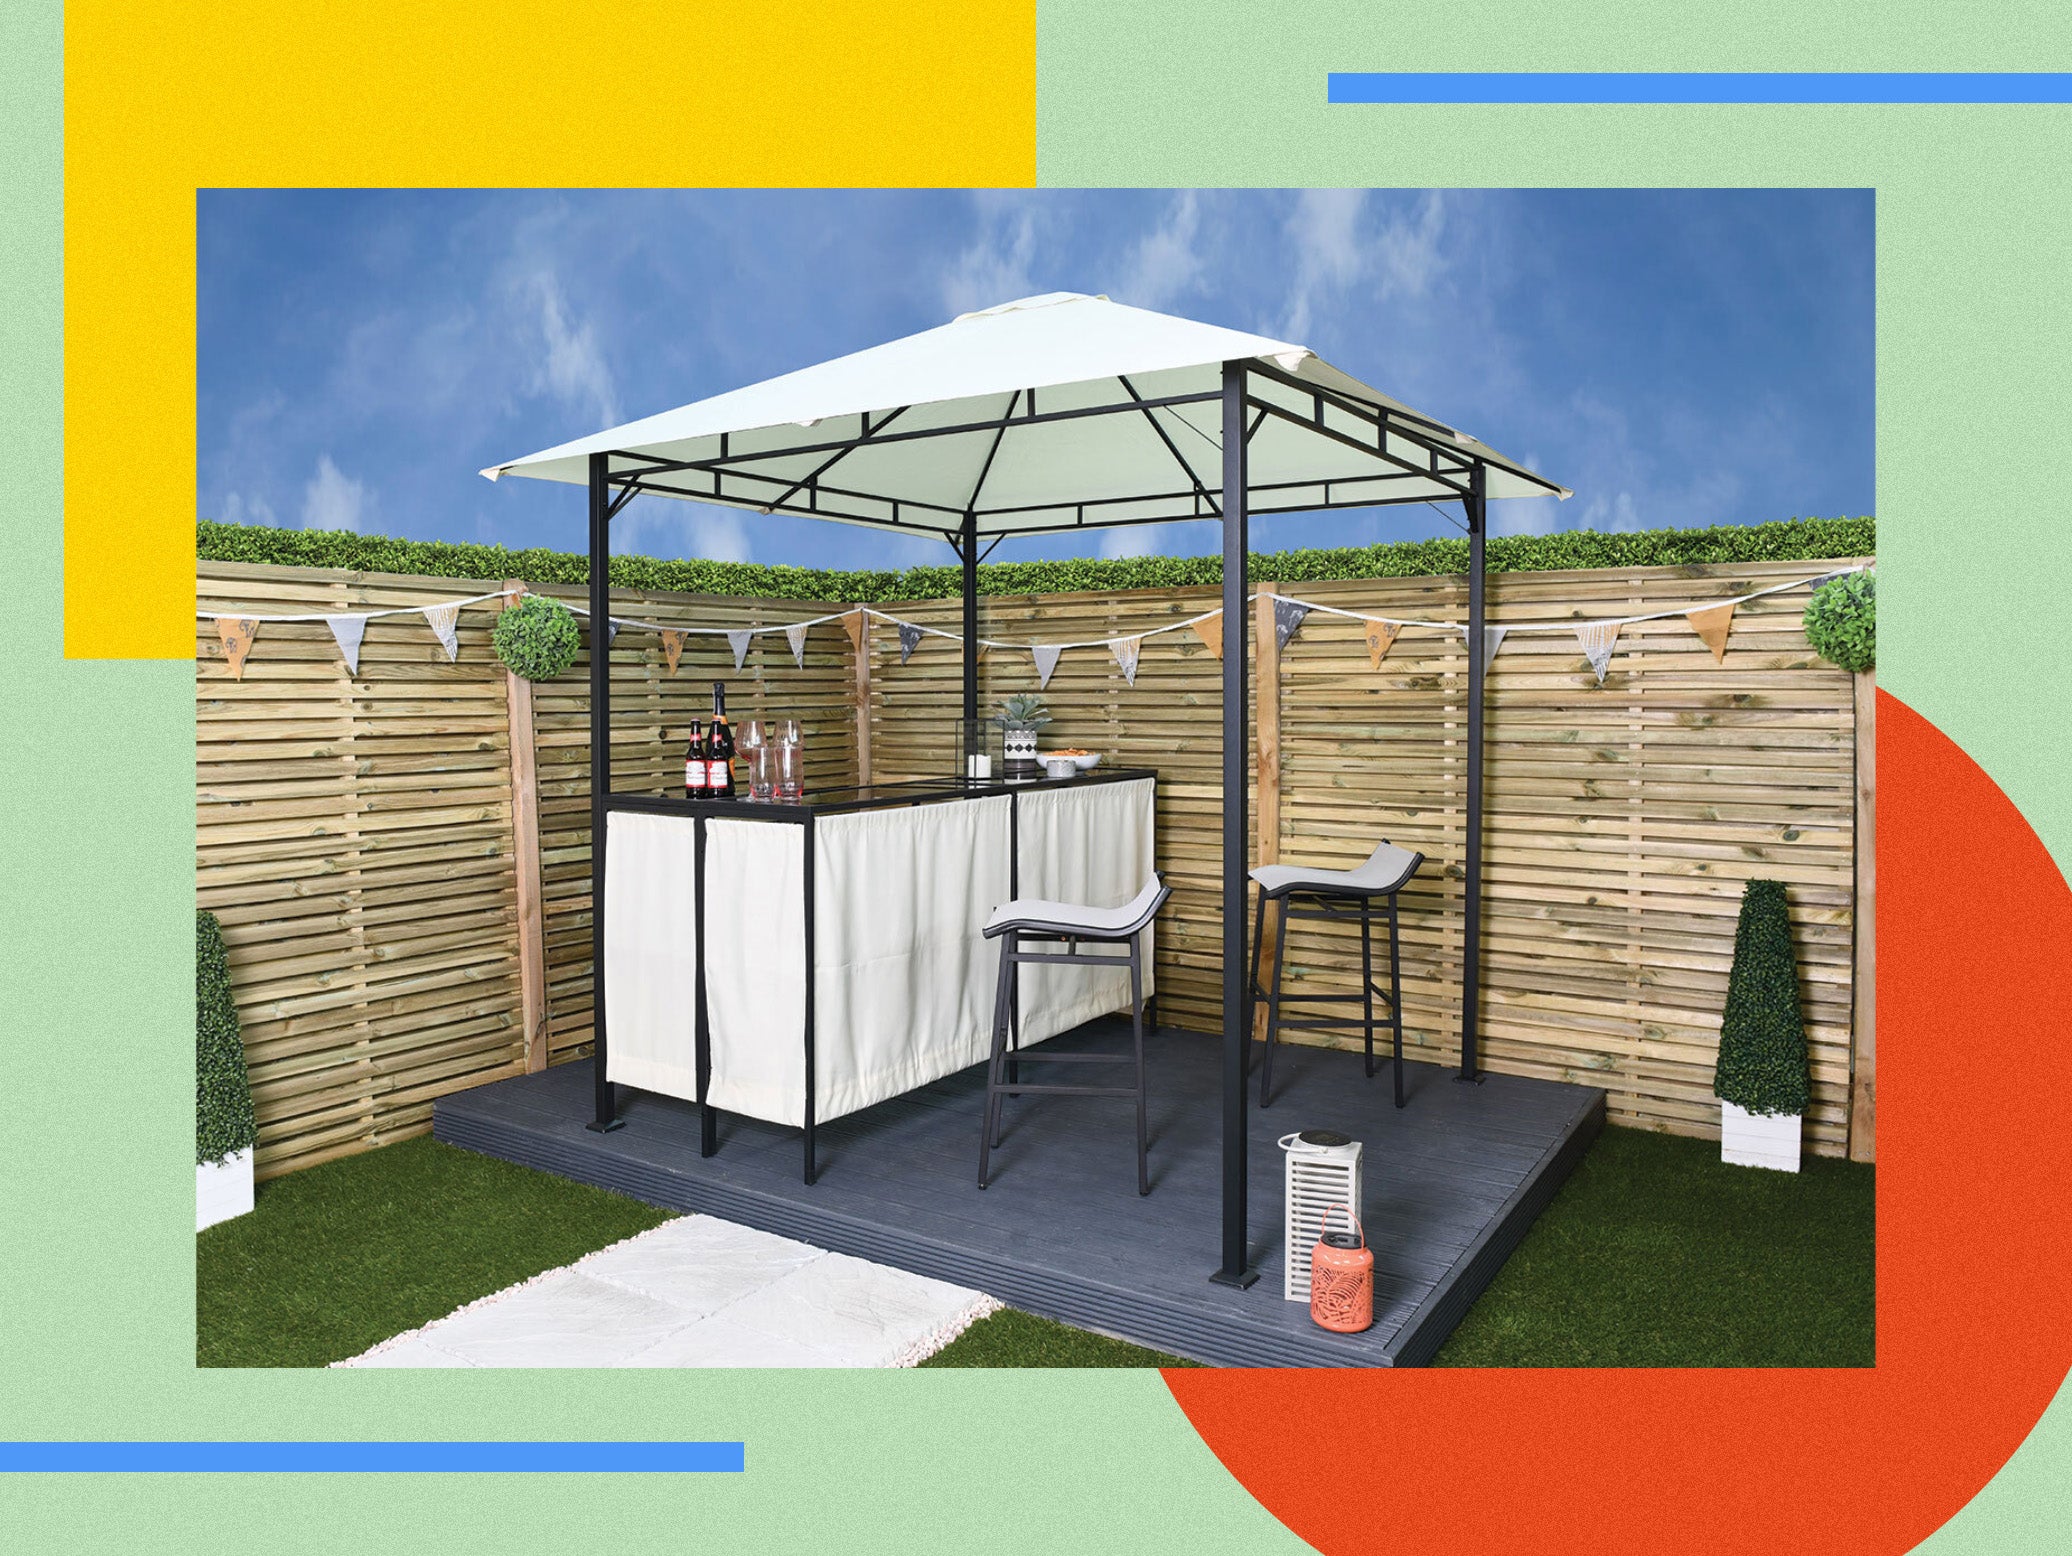 It has everything you need to transform your space into a luxury outdoor bar, including two stools and shelter from the sun